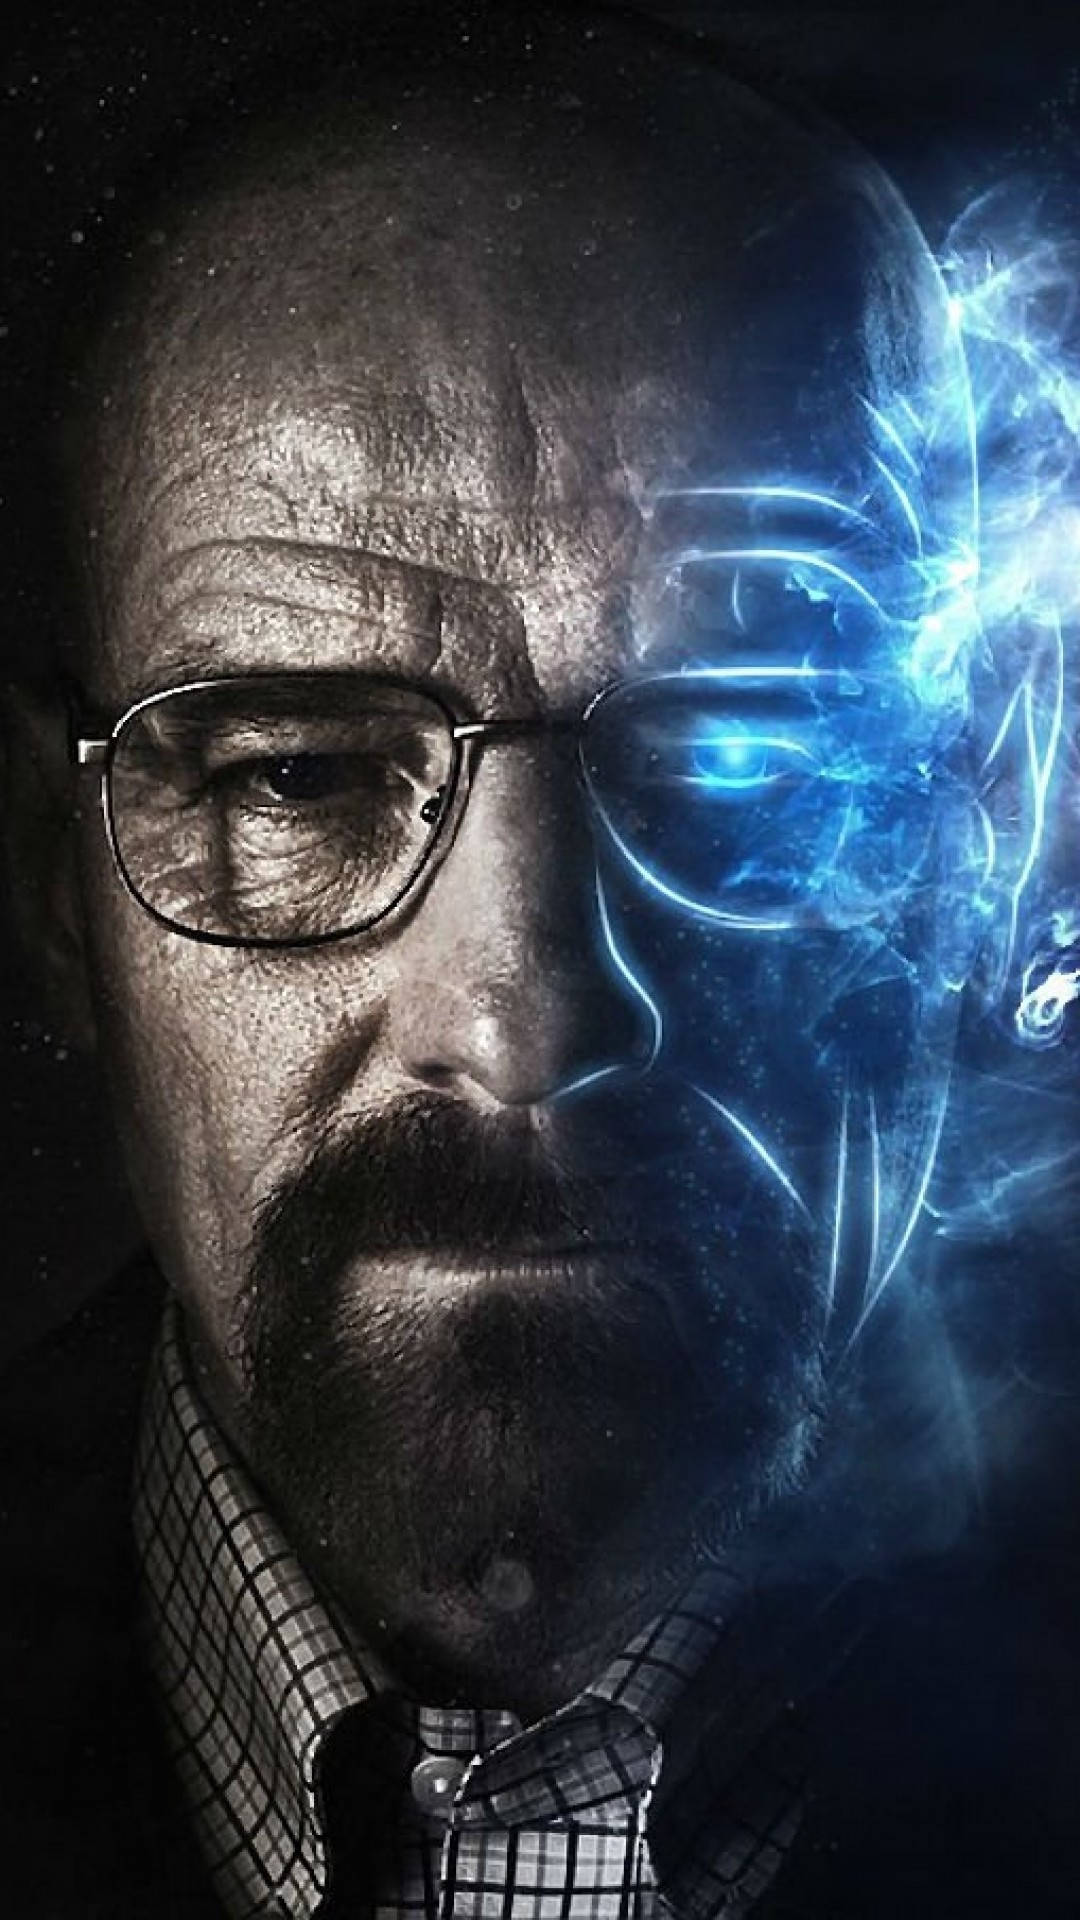 Walter White, (Bryan Cranston) of Breaking Bad in an iconic portrait. Wallpaper